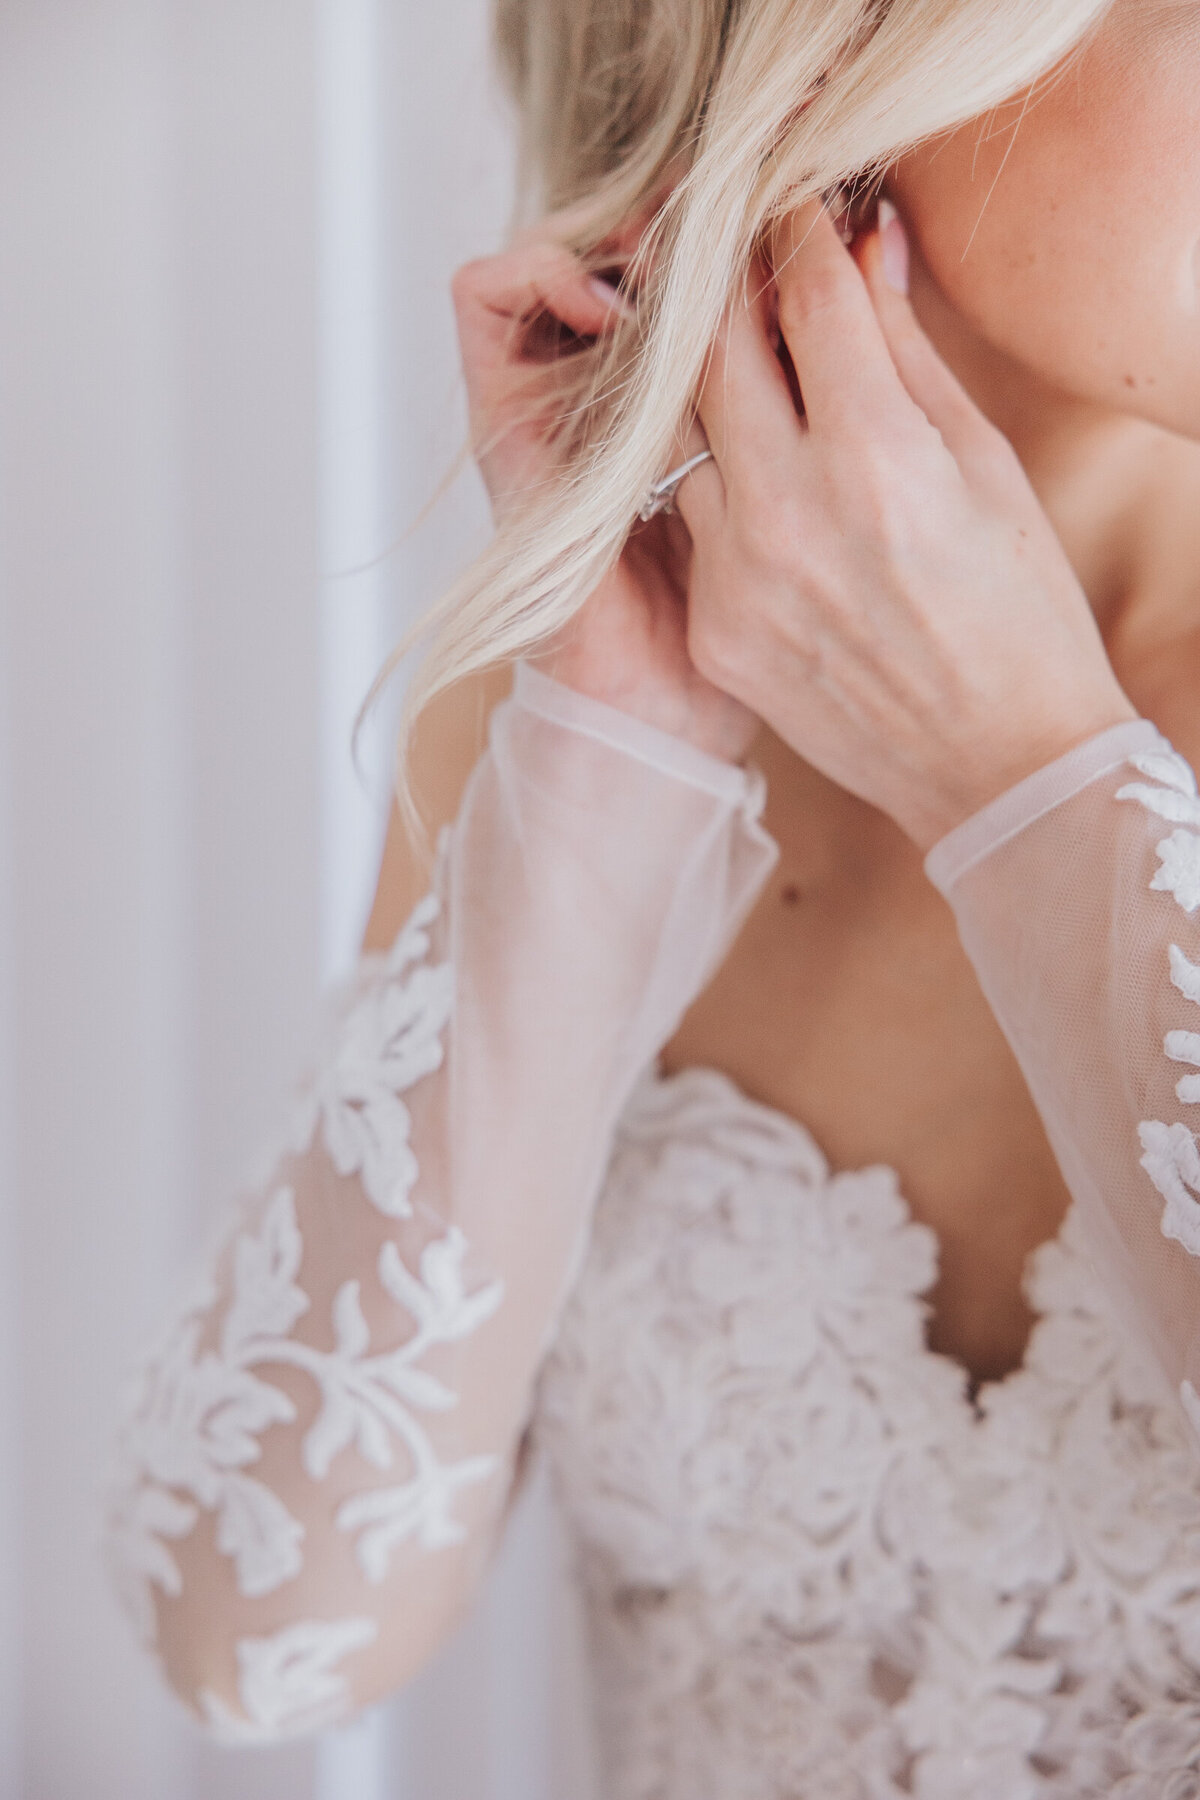 Detail shot of bride putting on jewellery photographed by Nova Markina